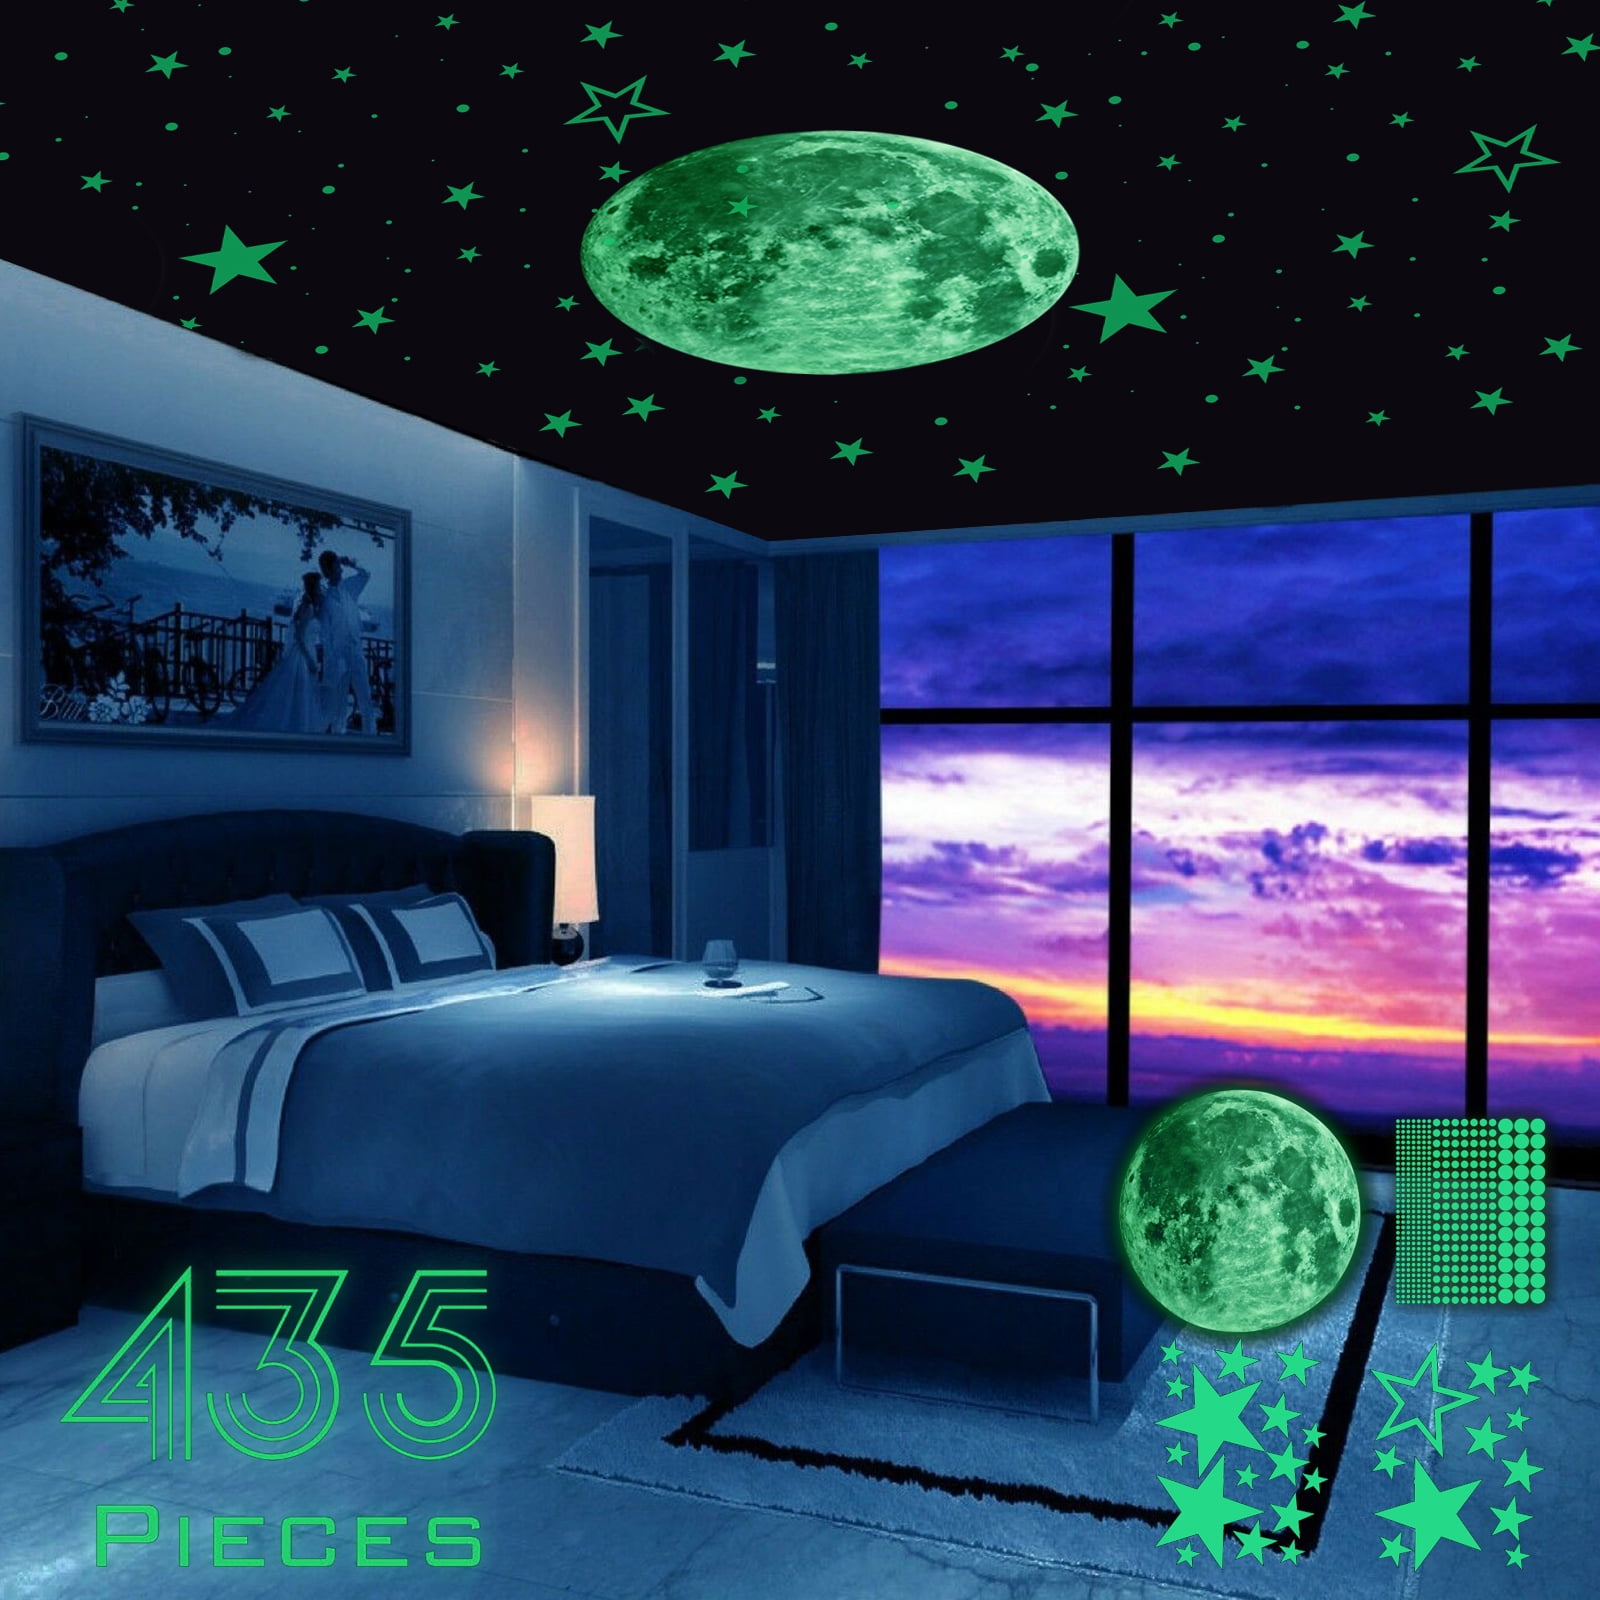 GLOW IN THE DARK FULL MOON Bedroom Wall Stickers Decal boys girls kids adult